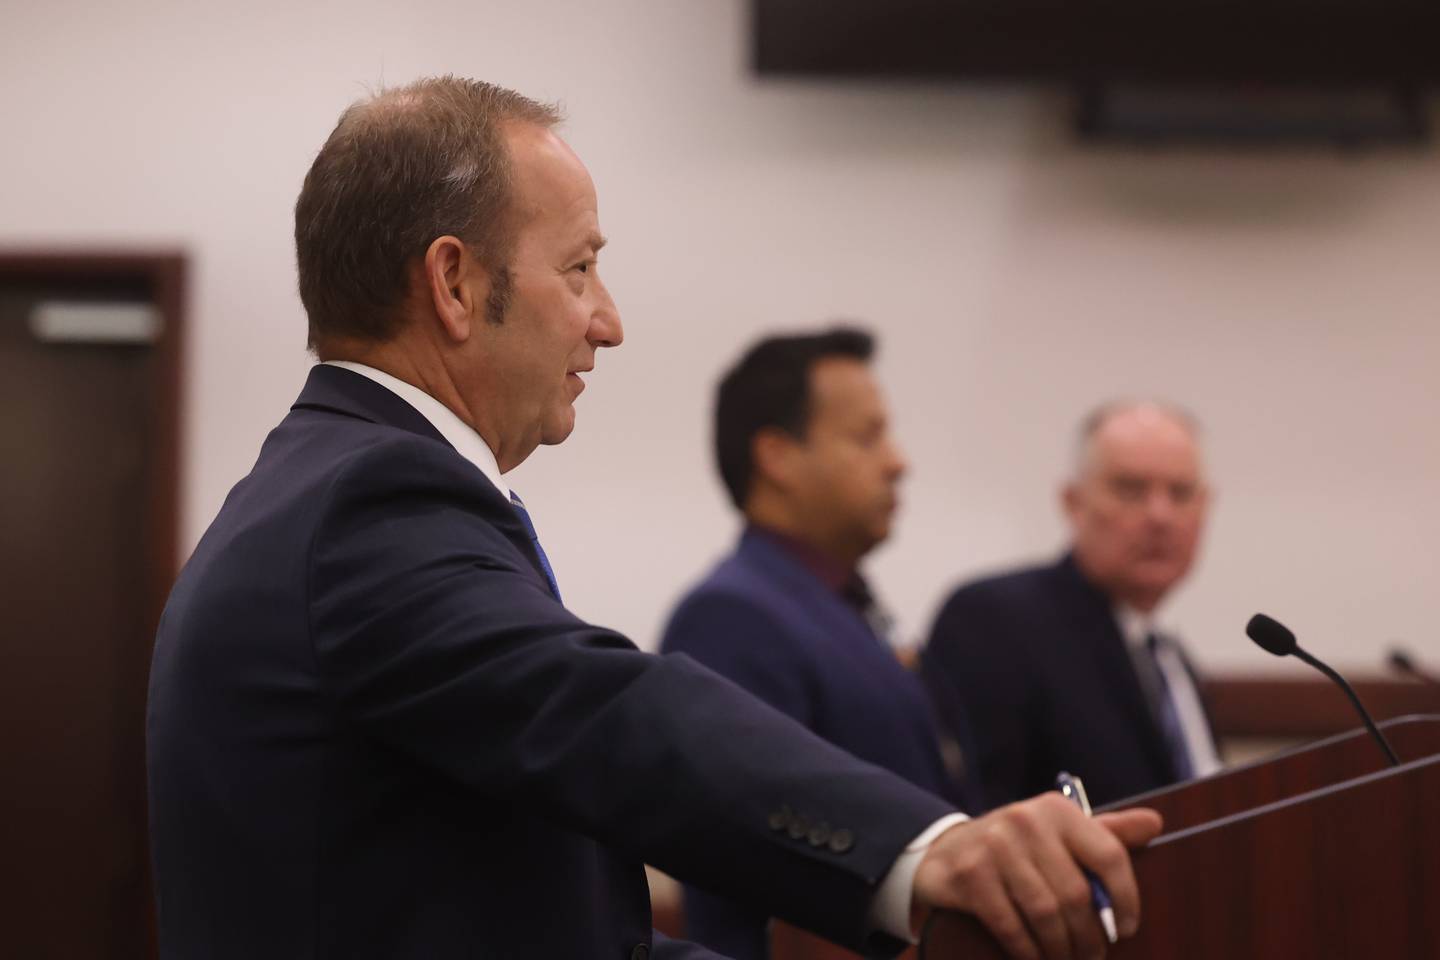 Kendall County Assistant State’s Attorney Mark Shlifka, left, speaks to the judge at the hearing for retired Joliet police sergeant Javier Esqueda at the Kendall County Courthouse in Yorkville. Esqueda is charged with official misconduct for accessing and leaking the police squad video of the arrest of Eric Lurry, 37, who died following his arrest on drug charges in January 2020.